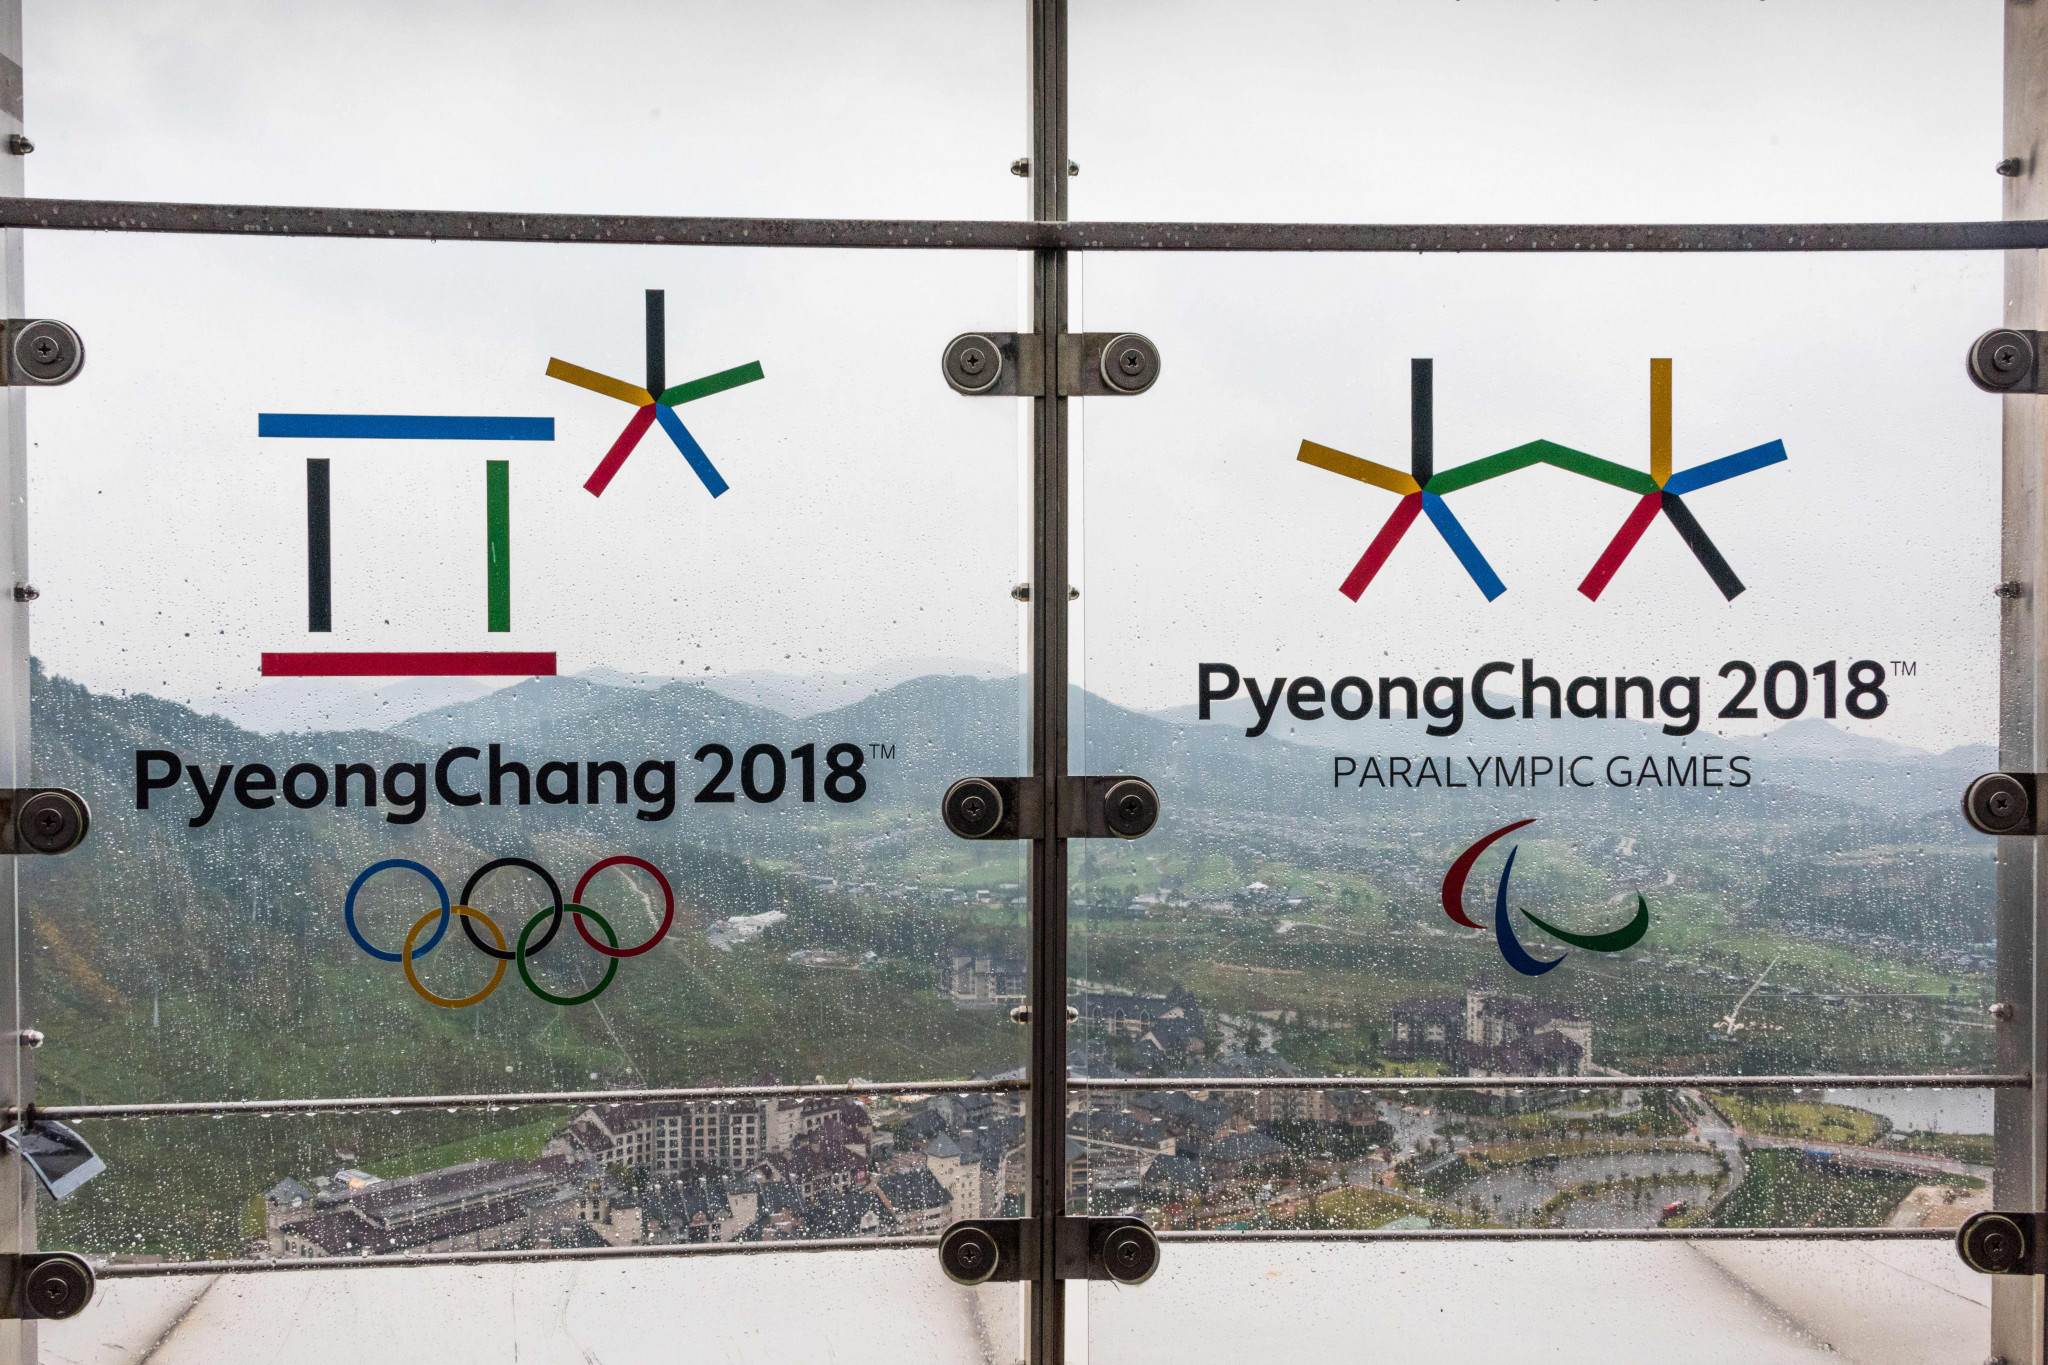 Security fears are threatening to overshadow Pyeongchang 2018  ©Getty Images